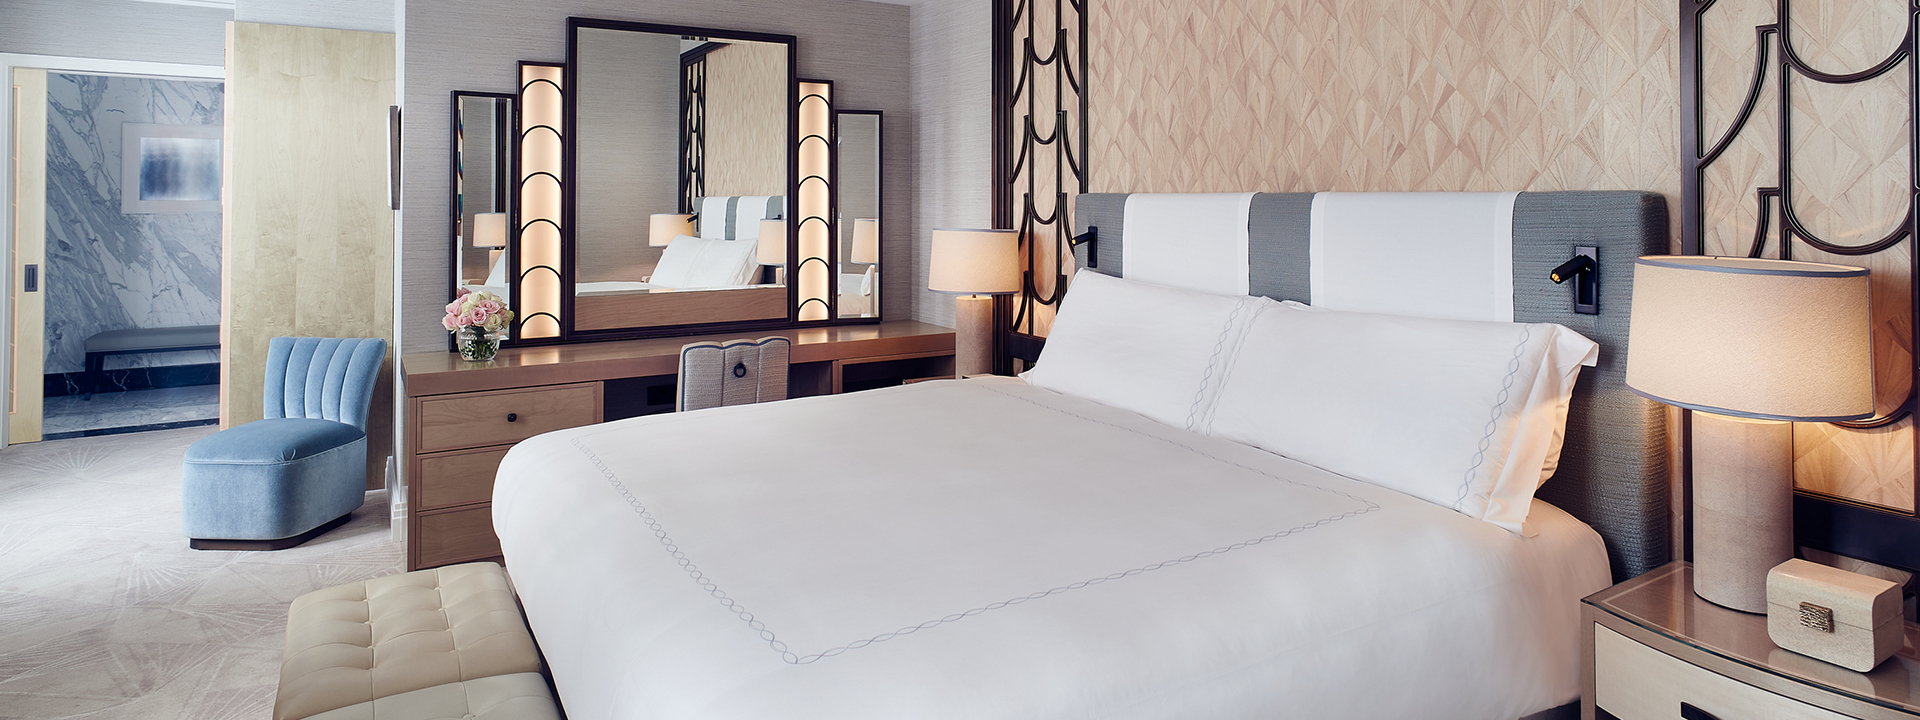 King Bed in the spacious bedroom of the Deluxe Junior Suite, surrounded by luxurious details and a comfortable armchair.